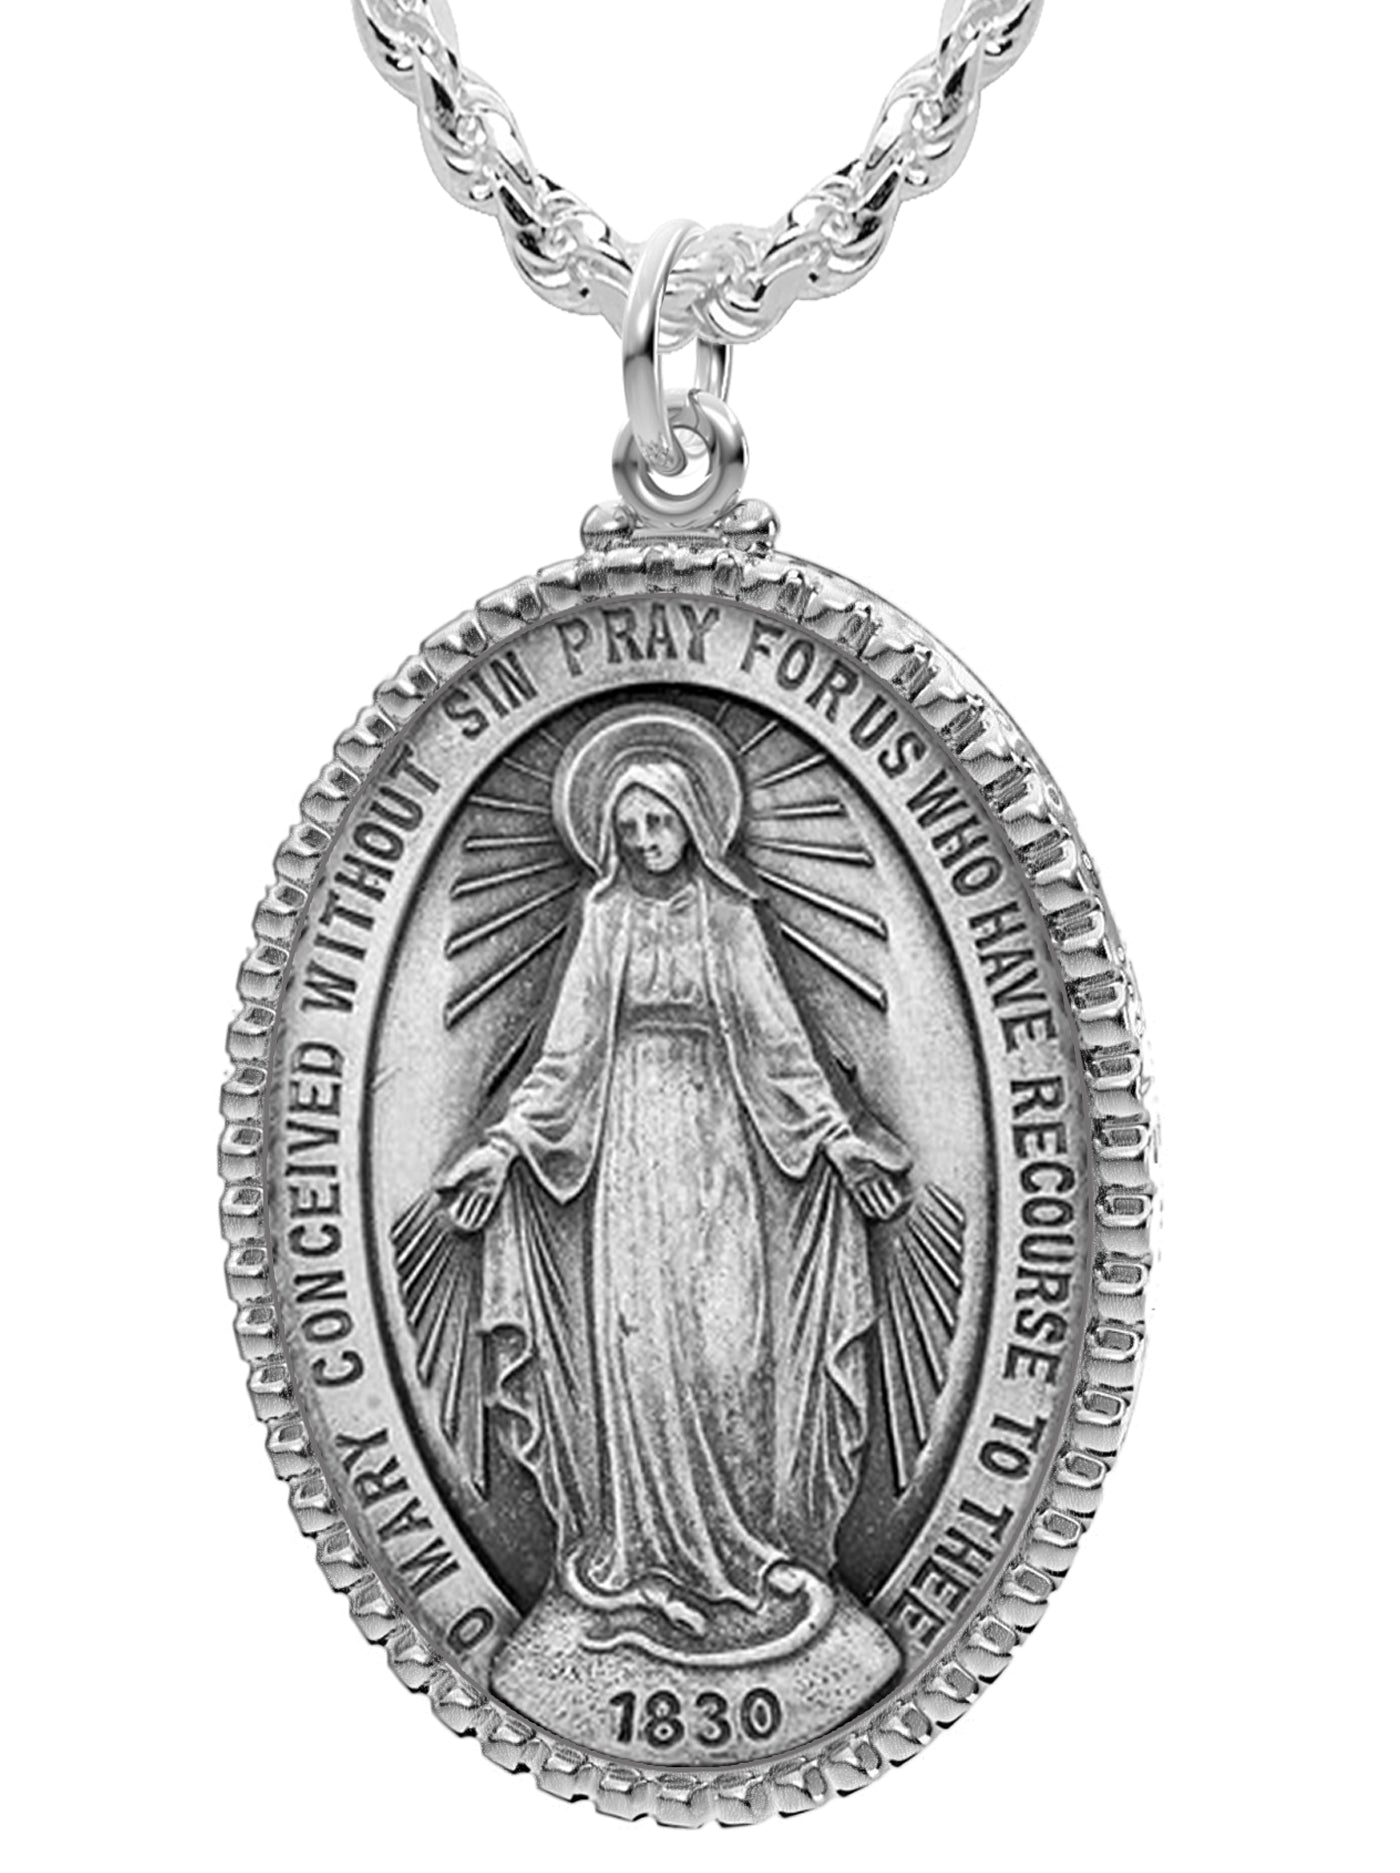 Virgin Mary Necklace - Silver Pendant In Antique Finish